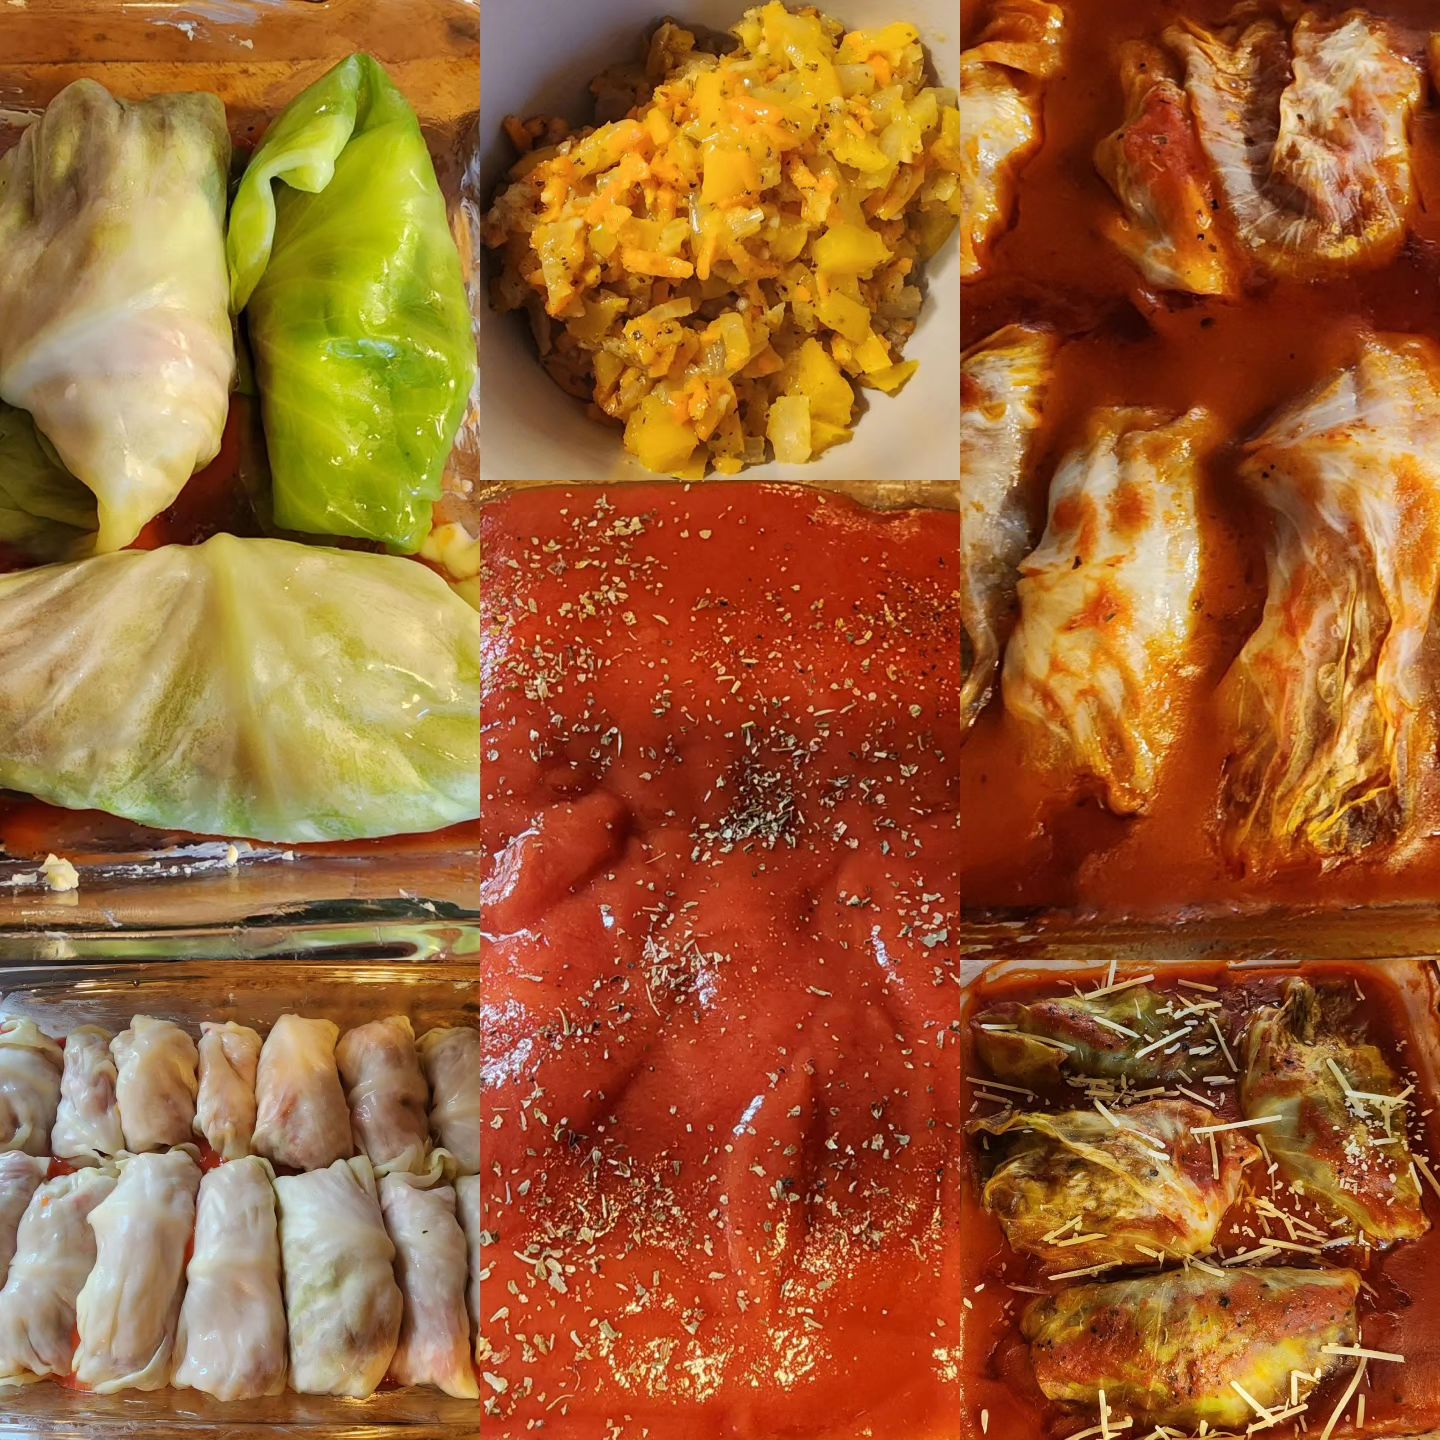 A collage of my ingredients putting together the stuffed cabbage.